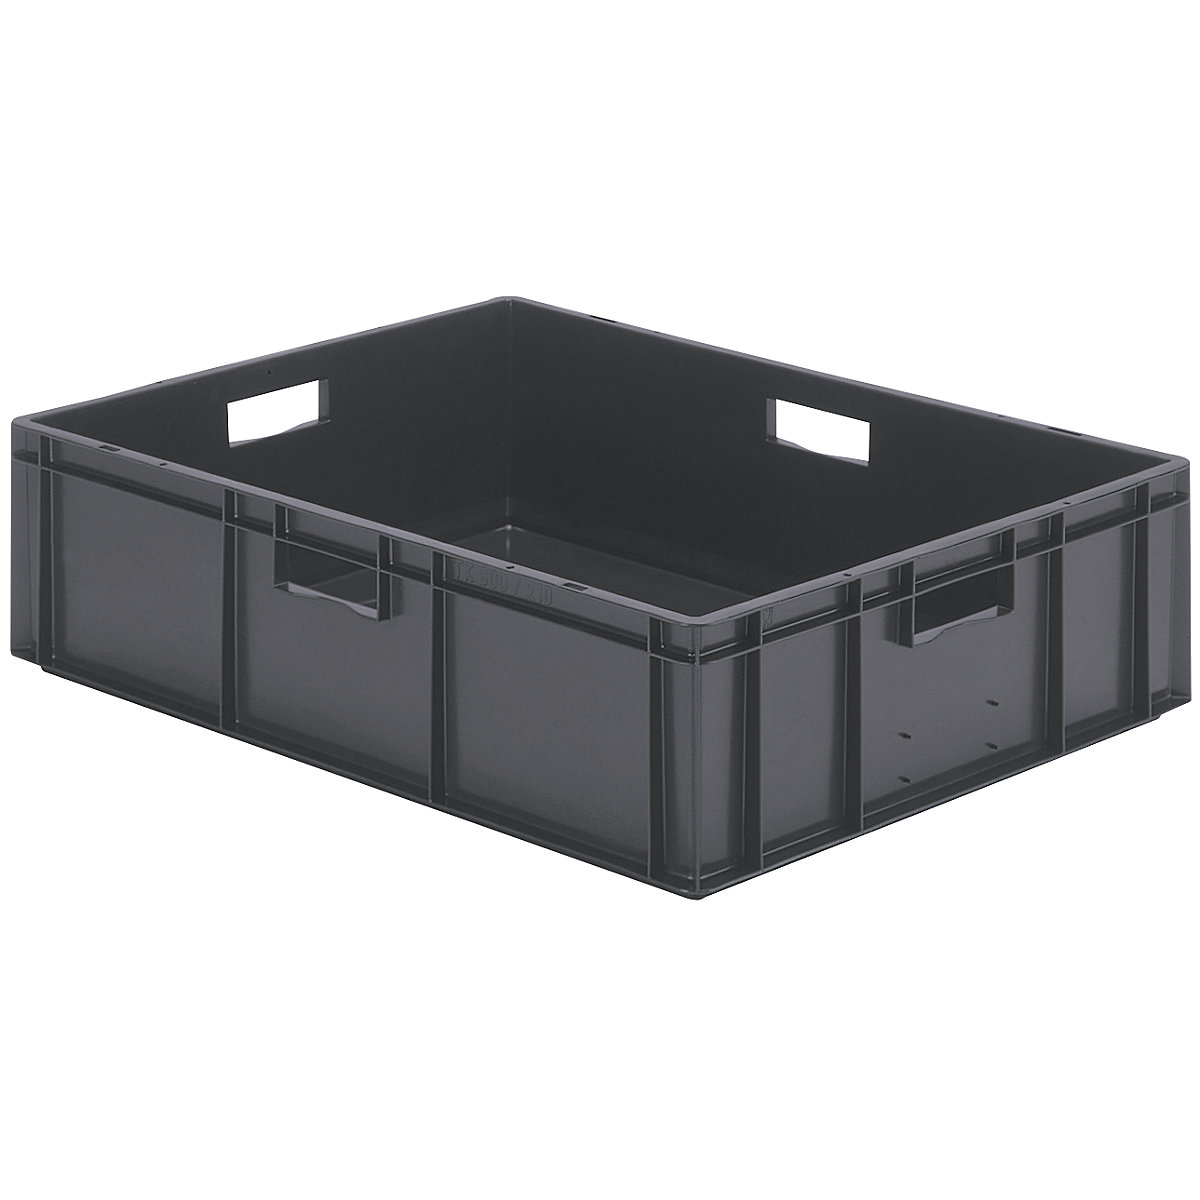 Euro stacking container, closed walls and base, LxWxH 800 x 600 x 210 mm, grey, pack of 2